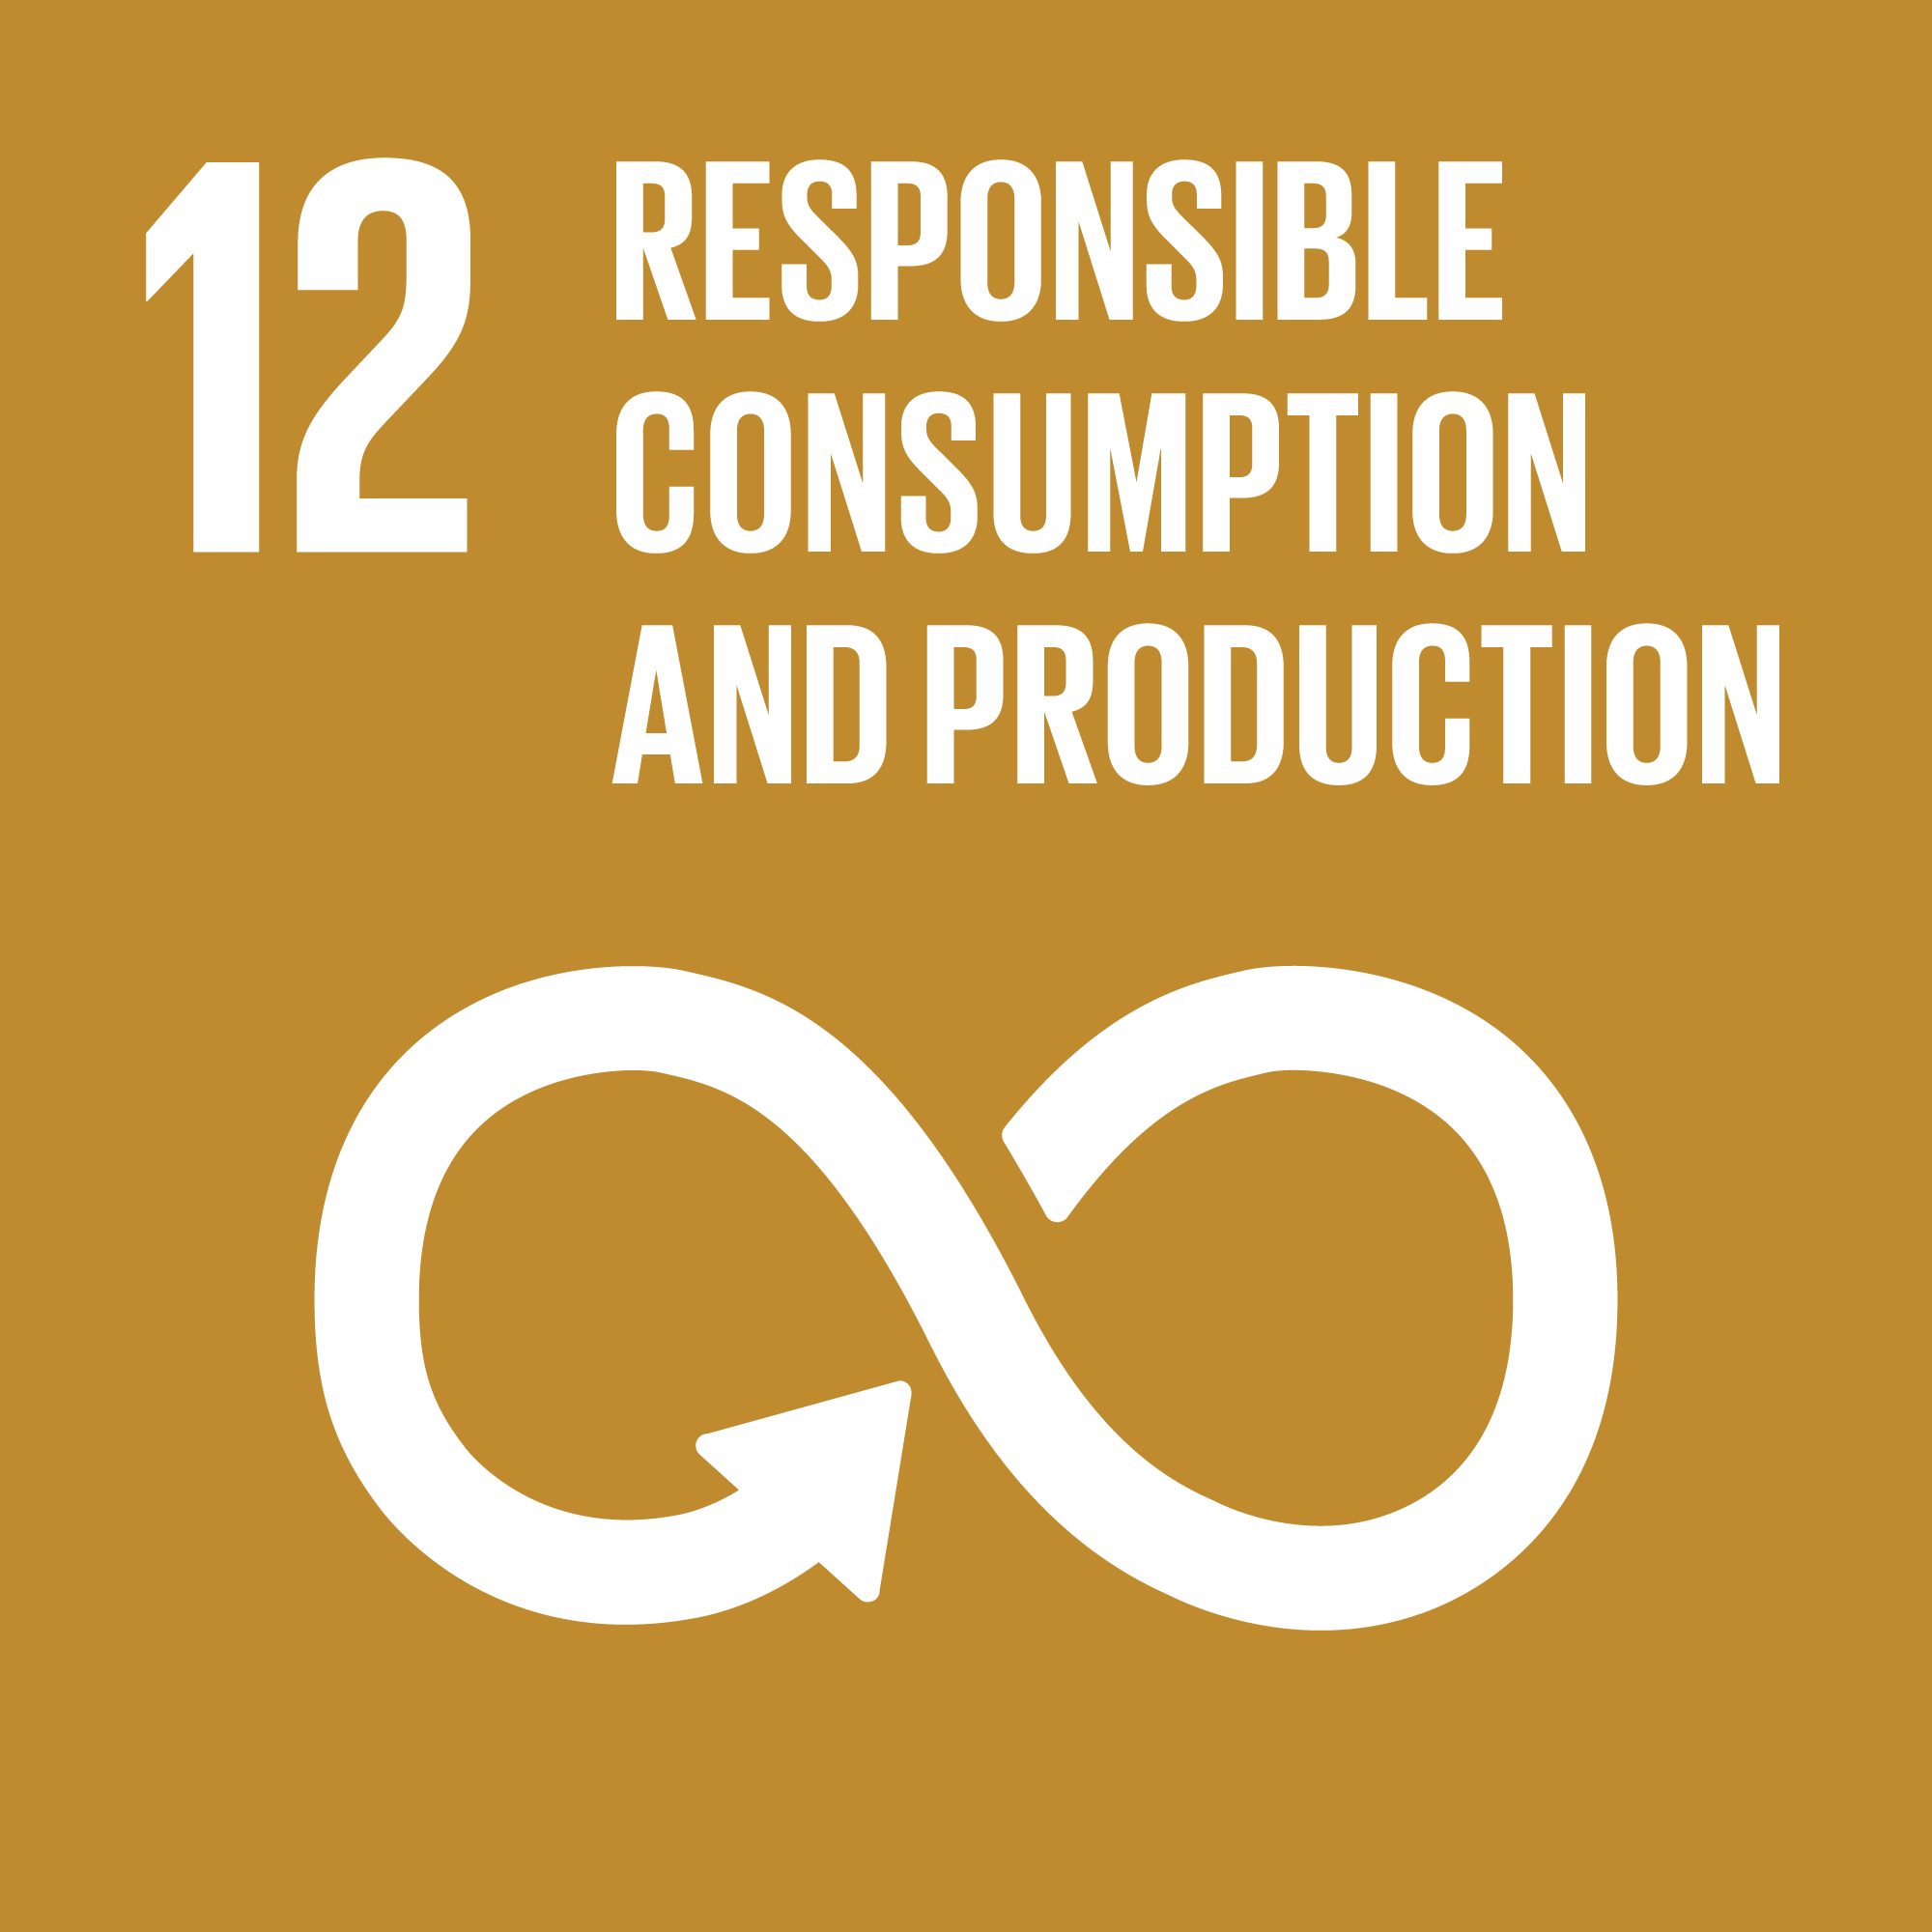 UNSDG Responsible consumption and production symbol